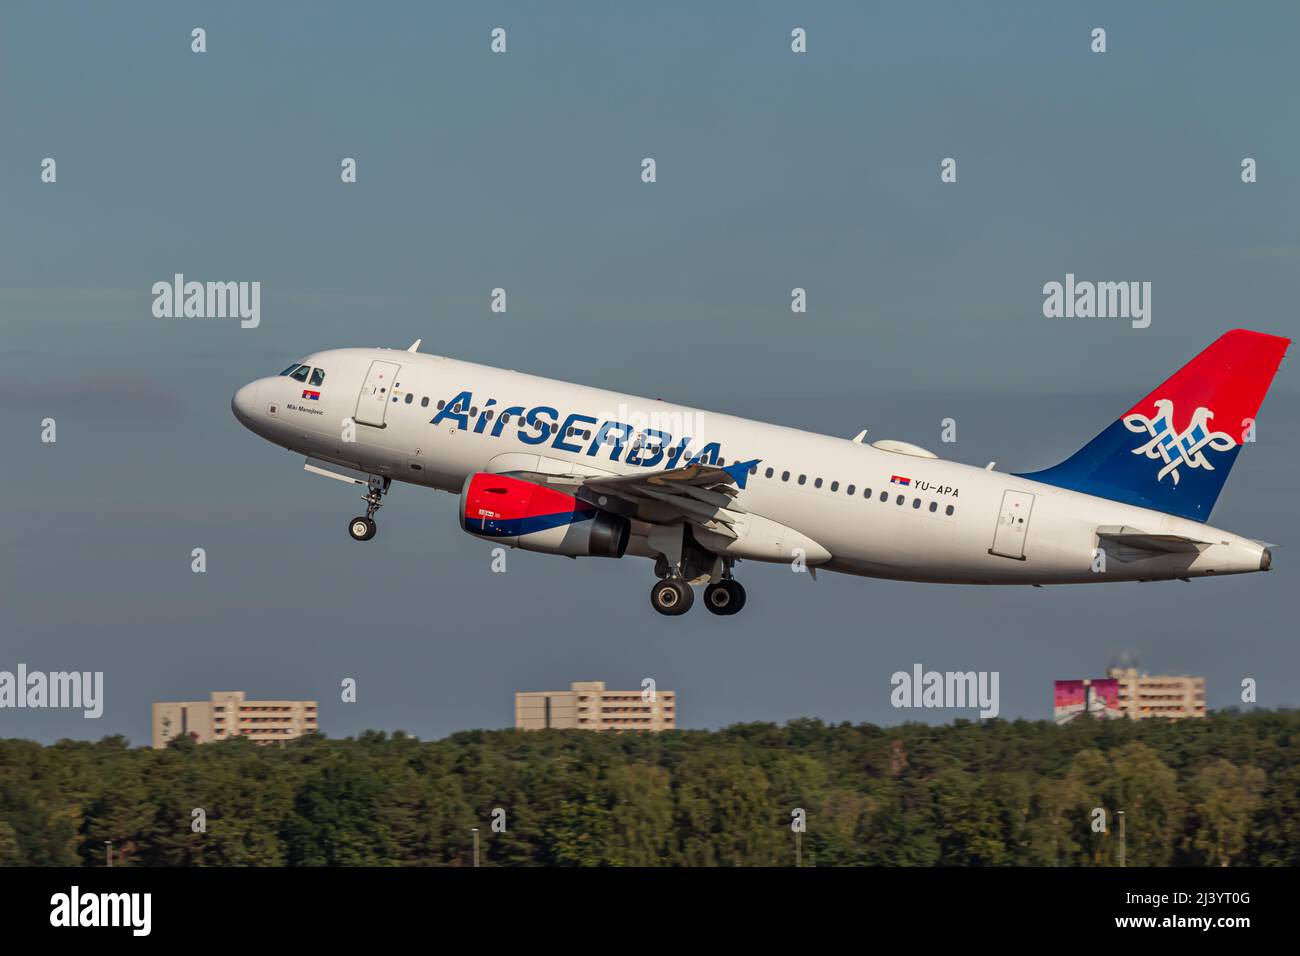 Berlin, Germany - September 15, 2018: Air Serbia Airbus A319 aircraft named after Miki Manojlovic departing from Tegel Airport Stock Photo